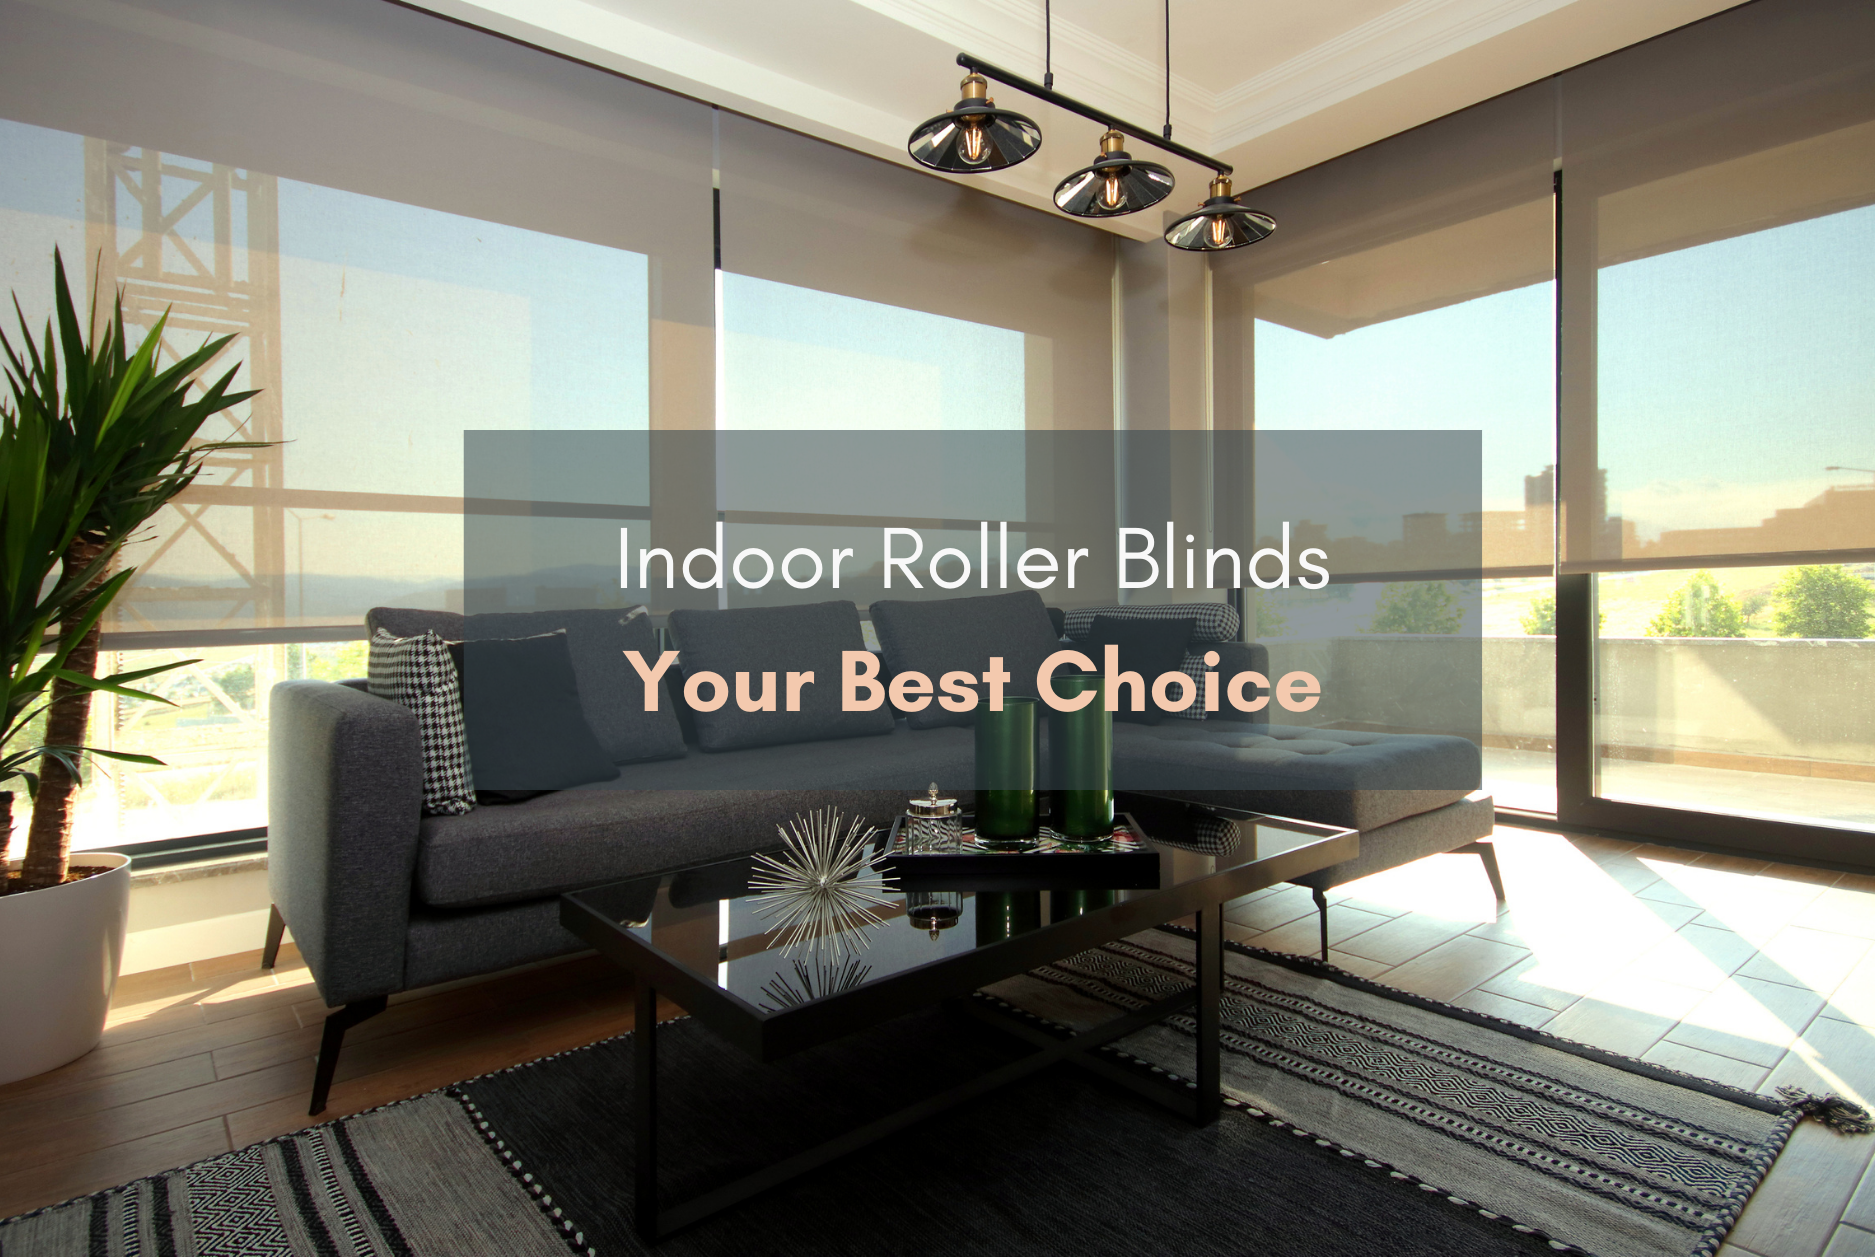 Indoor Roller Blinds Your Best Choice